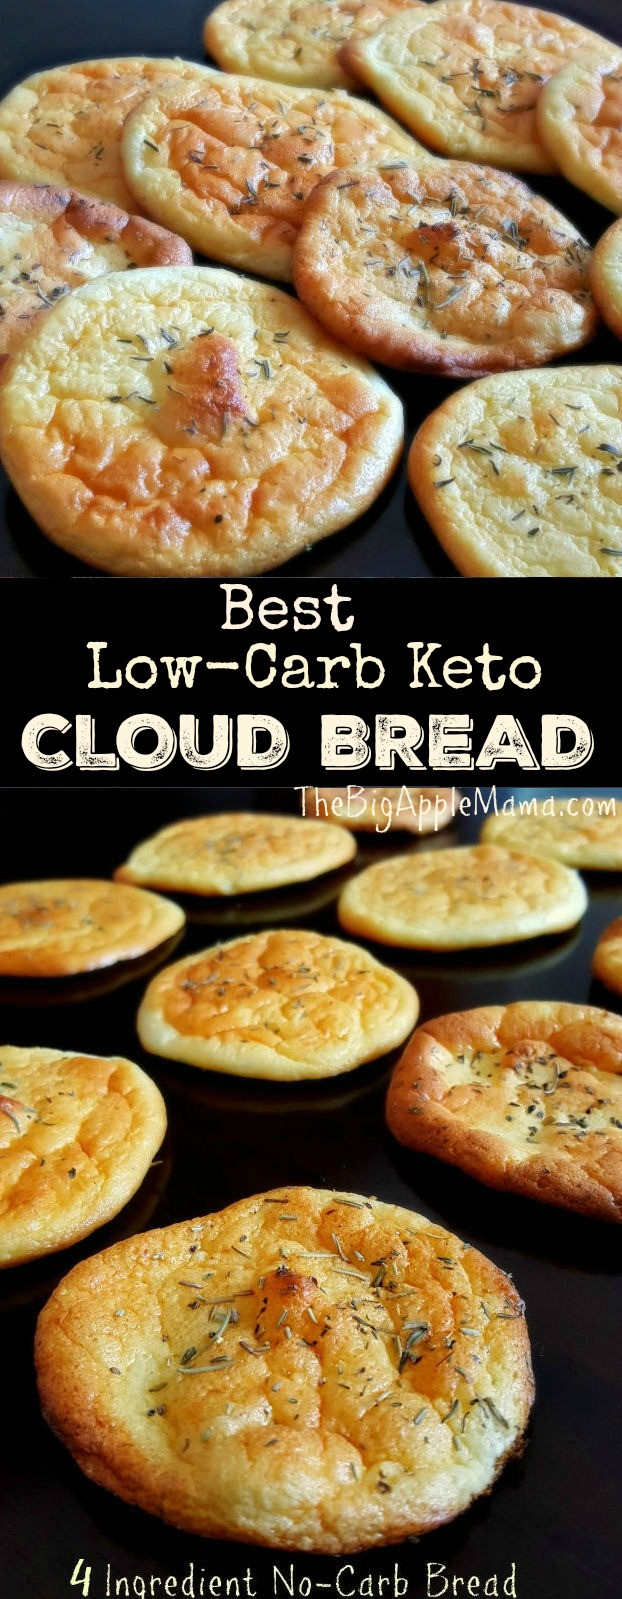 No Carbohydrate Bread
 The Best No Carb Cloud Bread with only 4 Ingre nts